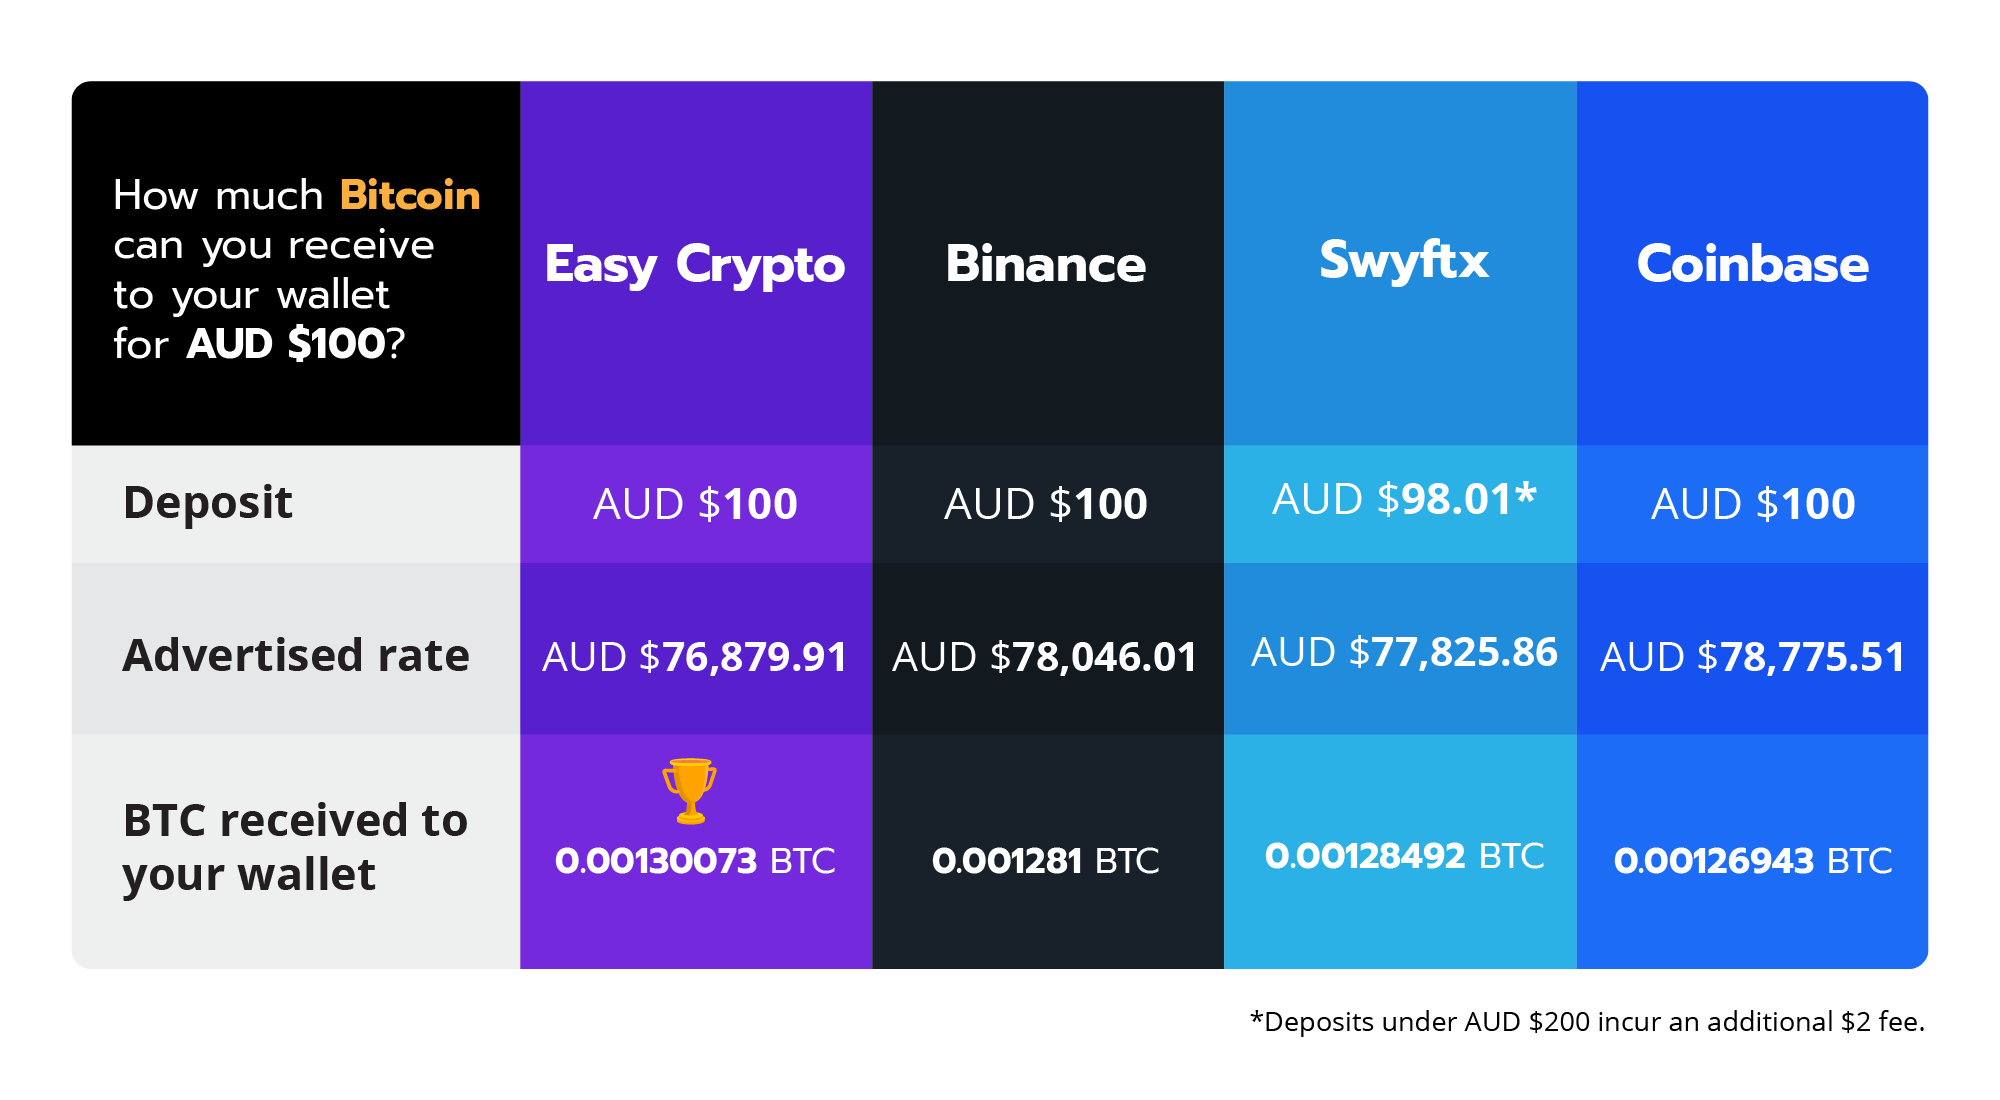 Infographic table showing the crypto comparison results for Australia.